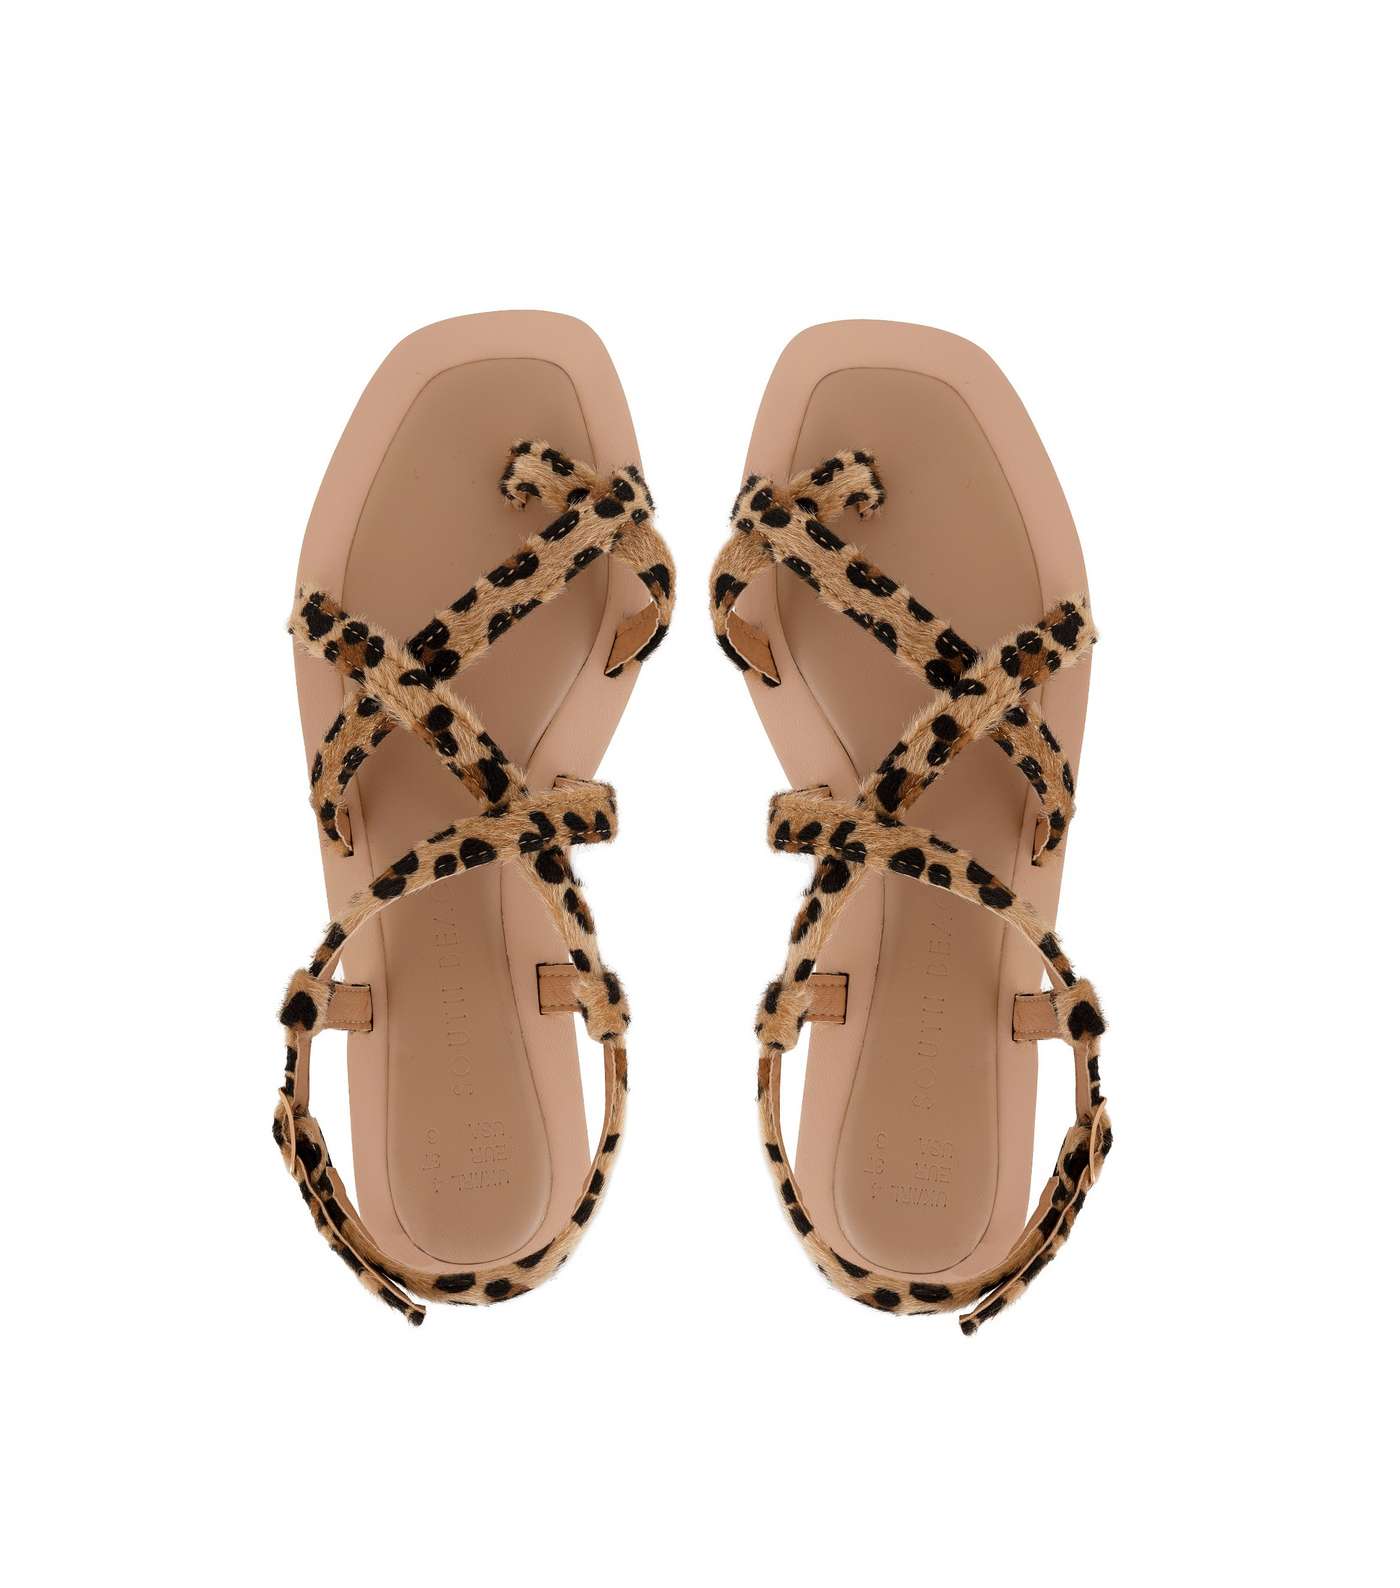 South Beach Brown Leopard Print Strappy Sandals Image 2